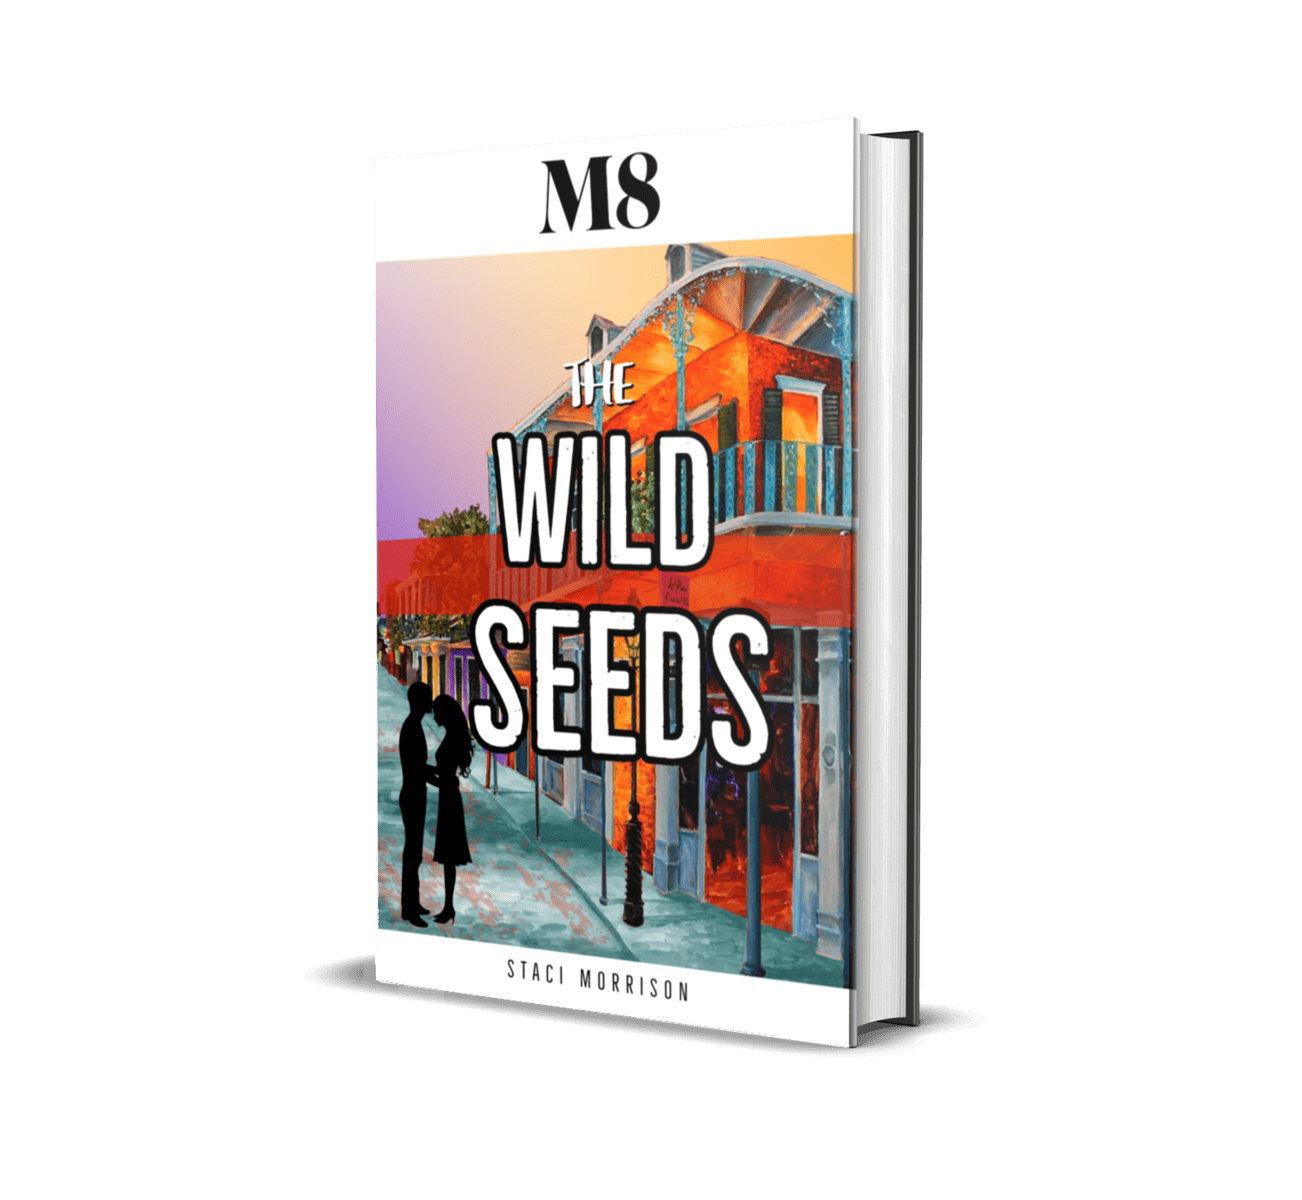 M8-the wild seeds cover, by staci morrison